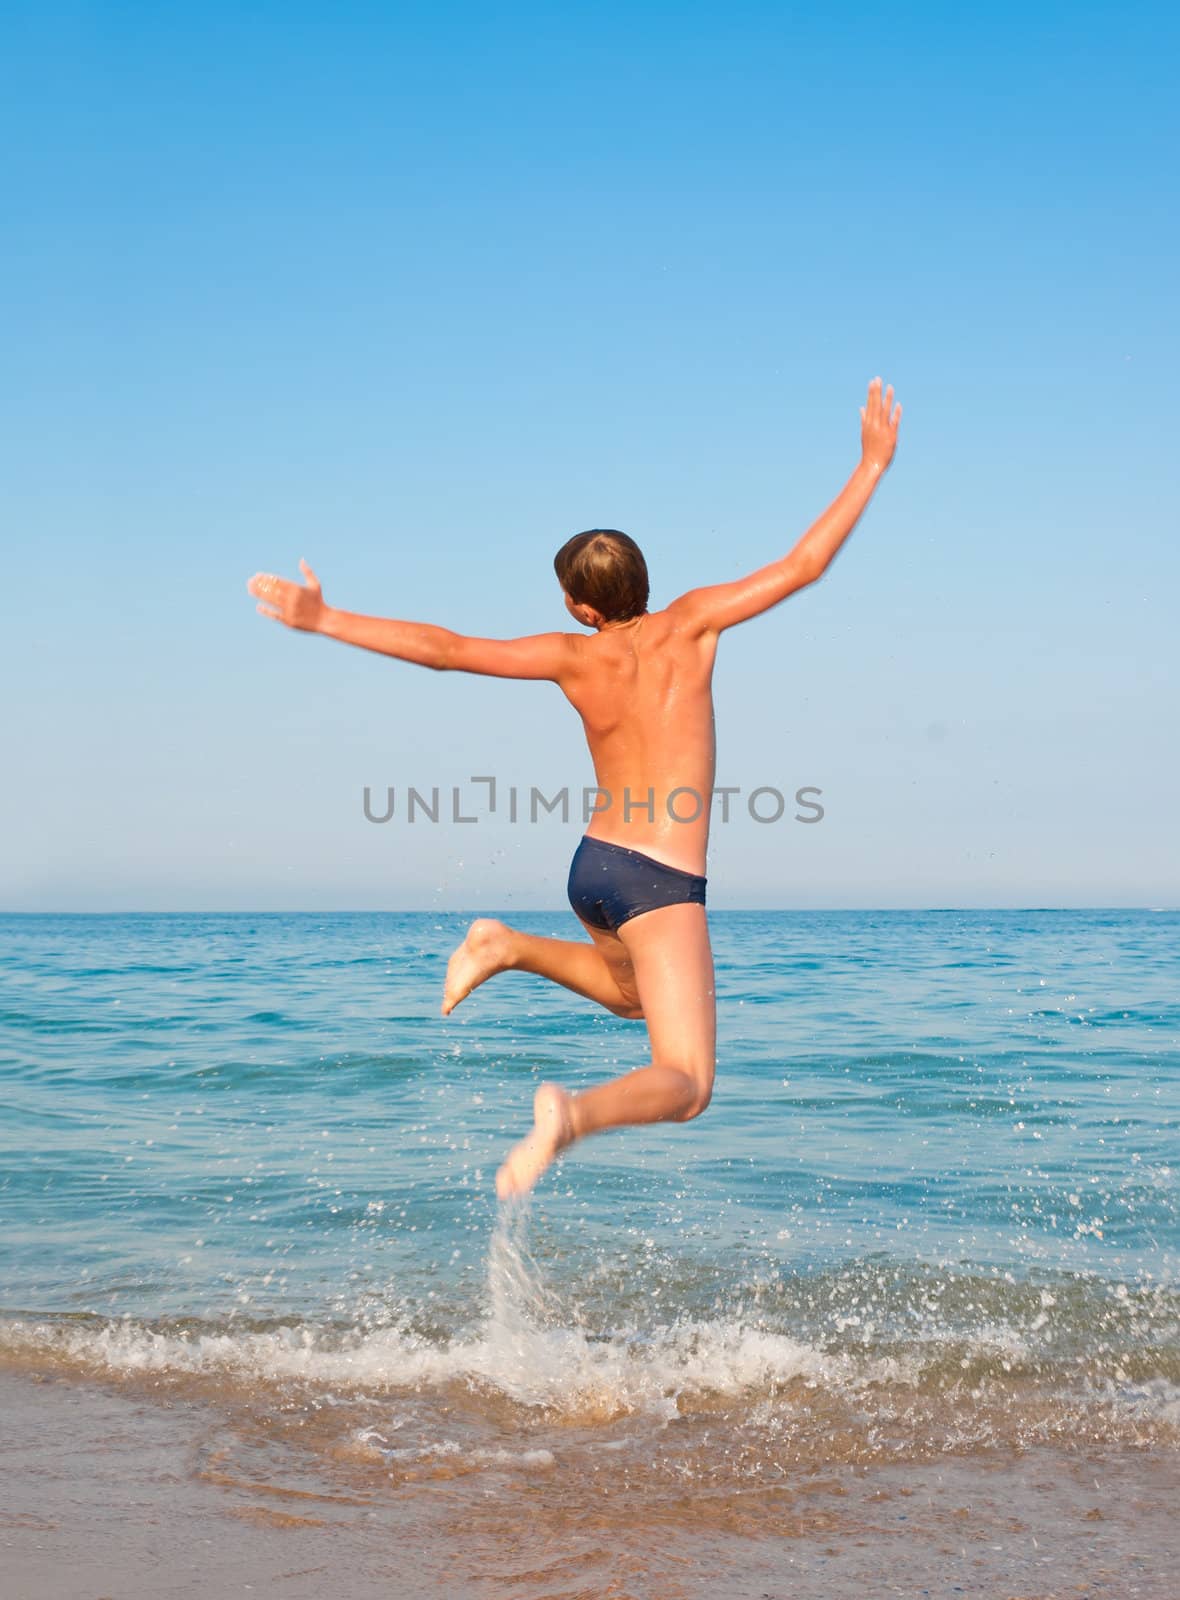 Boy jumping on beach. Concept for rest, relaxation, resorts.